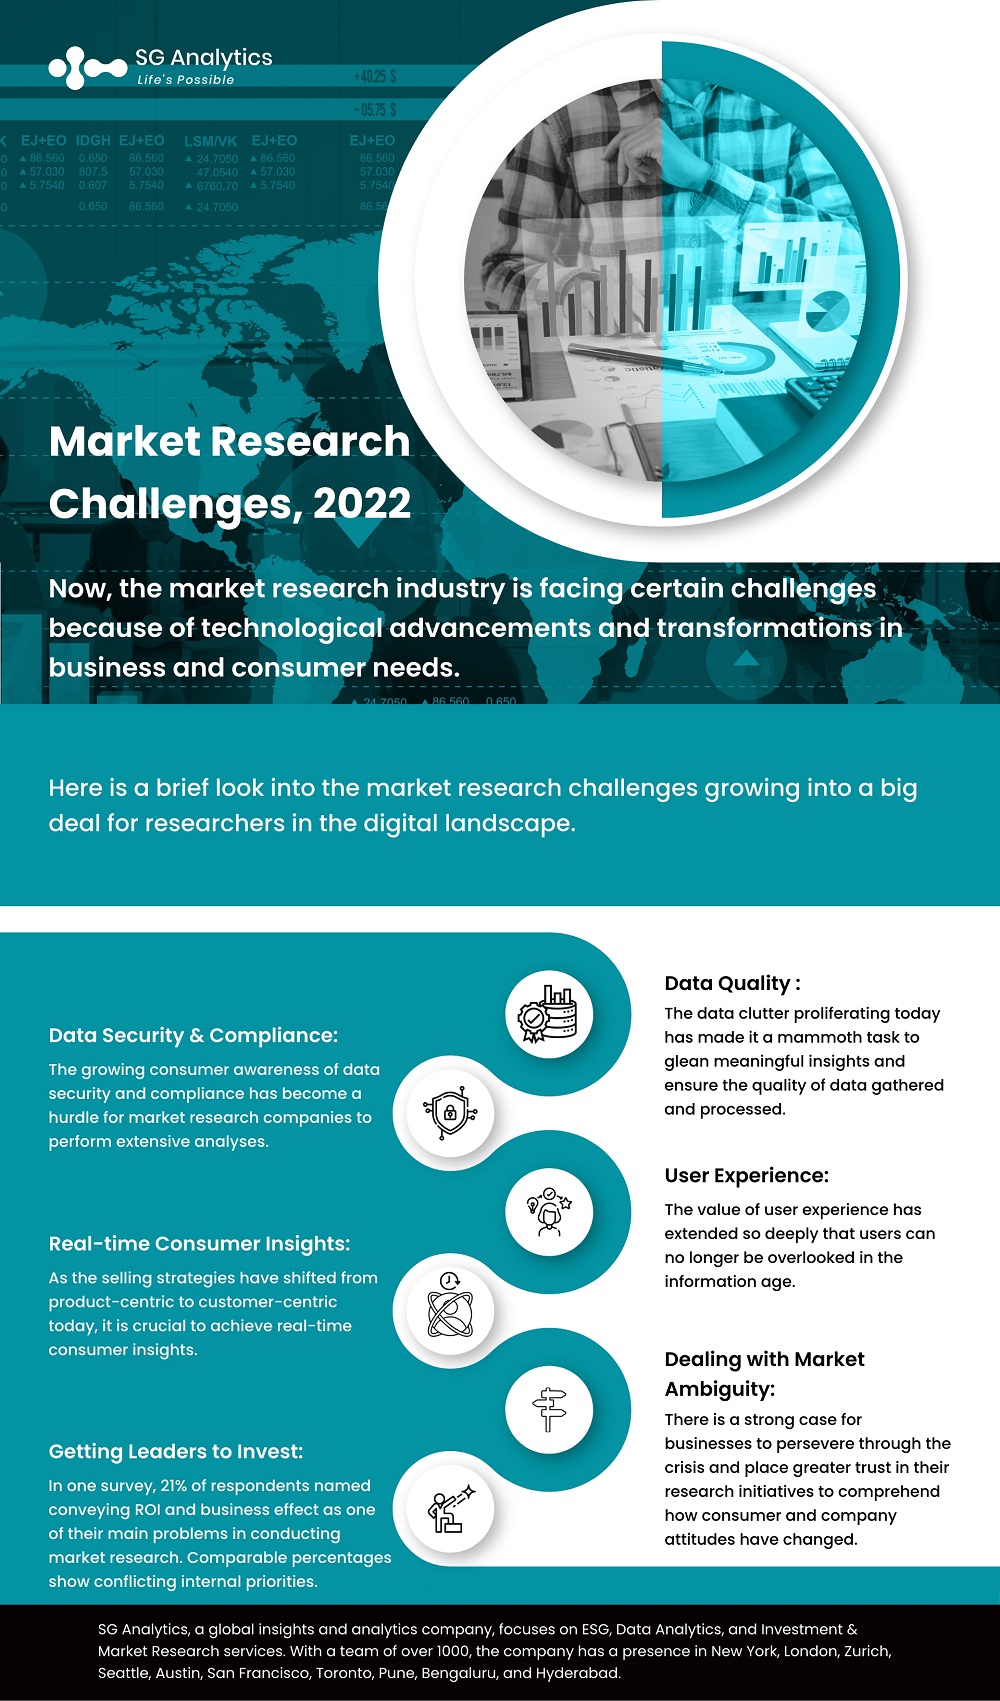 what is one of the significant challenges for marketing research?